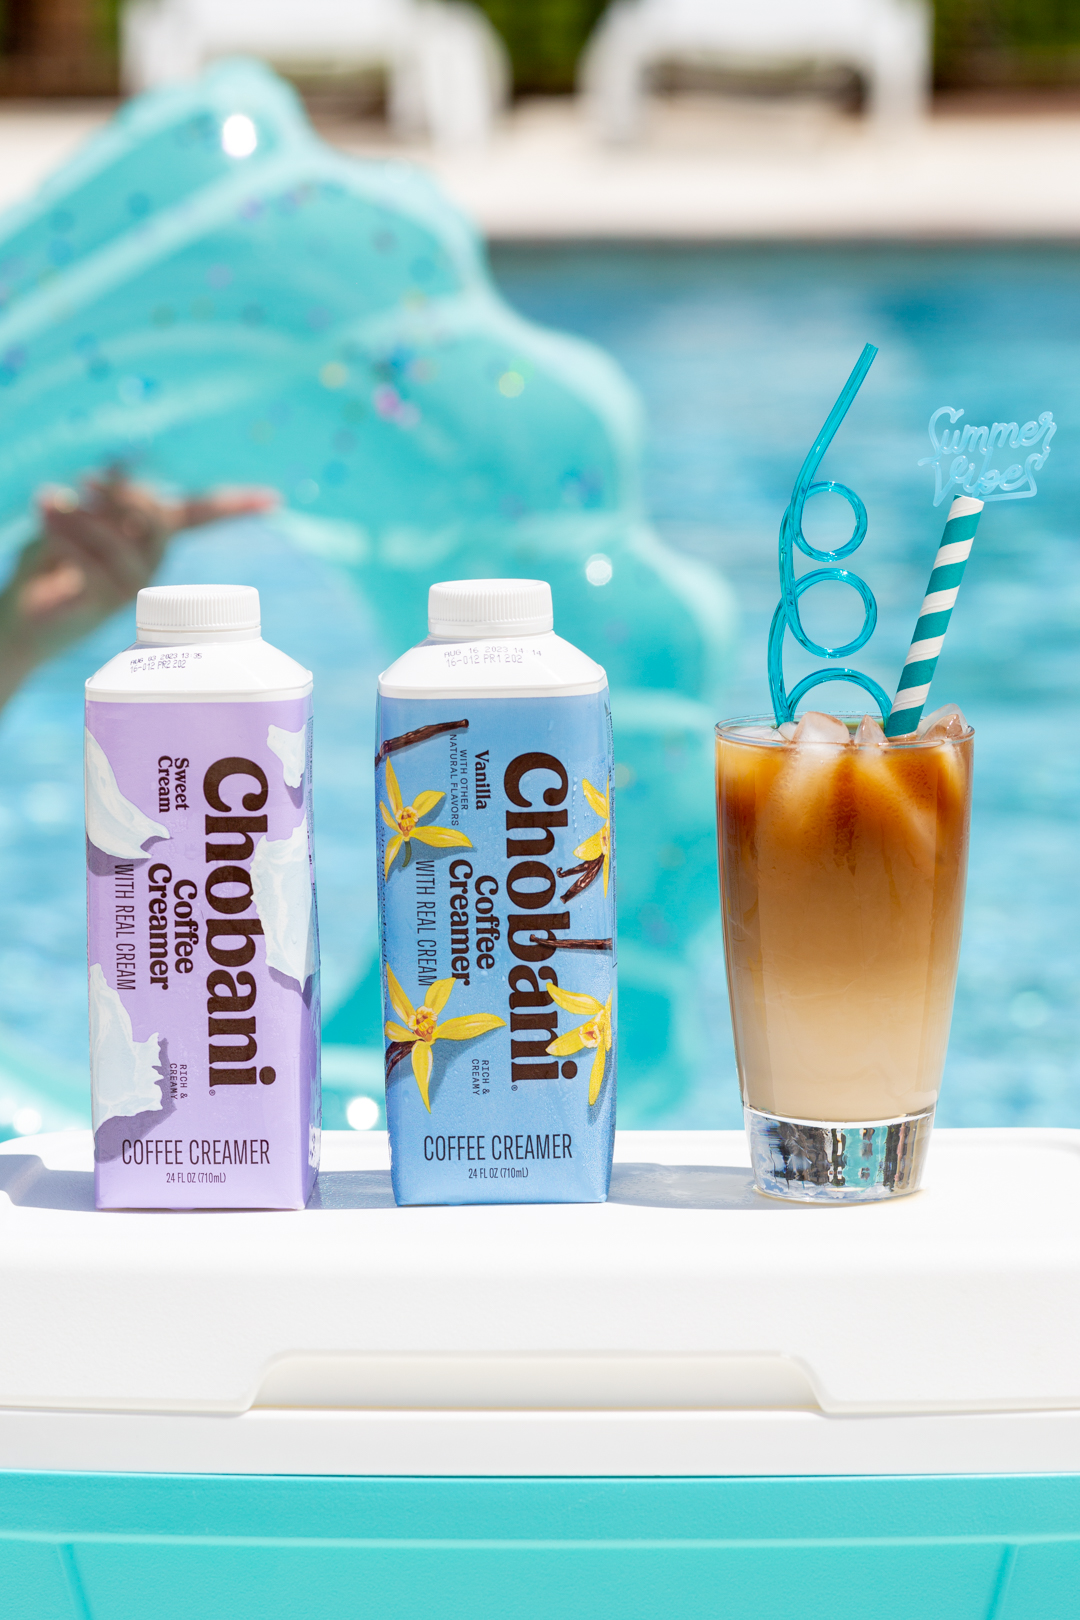 poolside iced coffee with chobani creamers. pool float in the background.